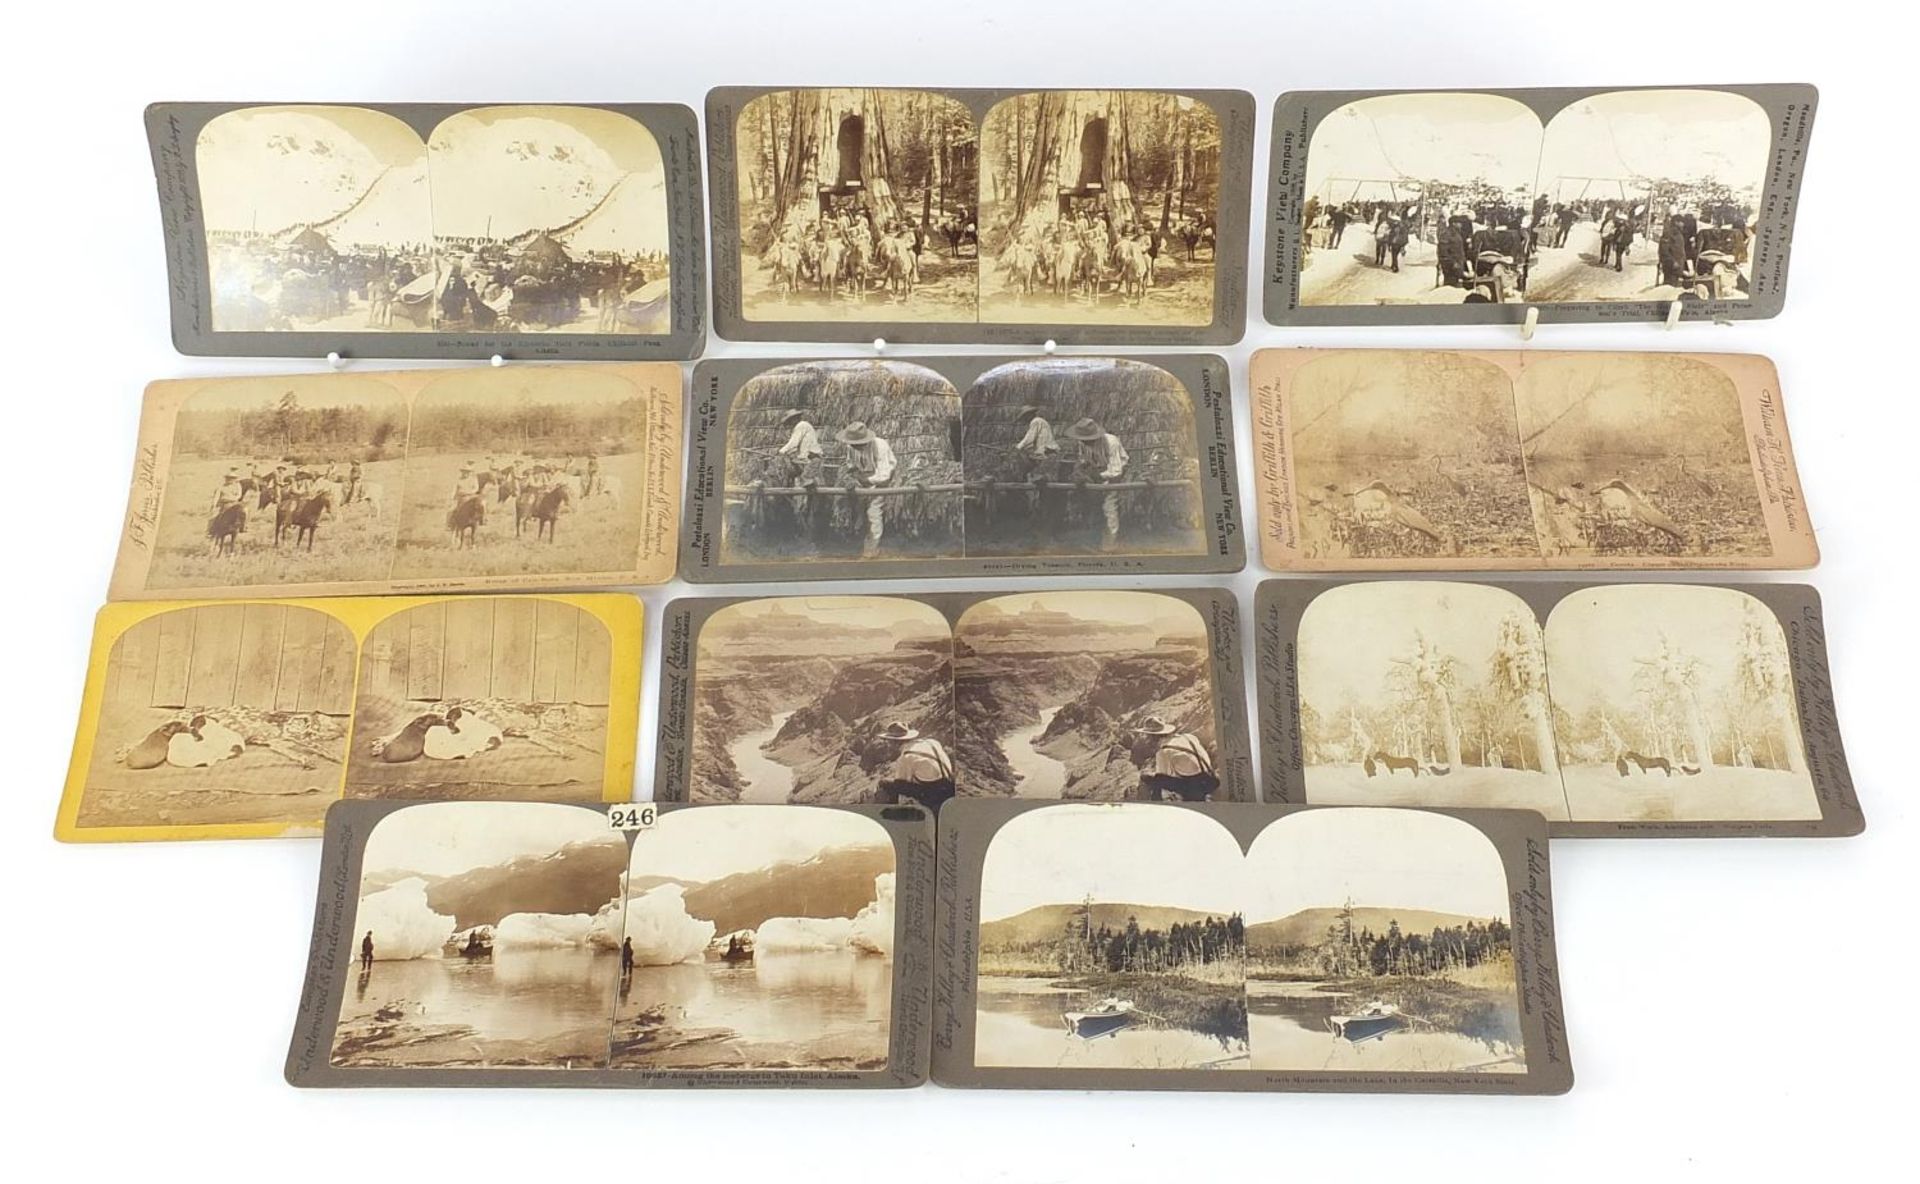 Eleven stereo cards relating to Americans in the 19th and early 20th century